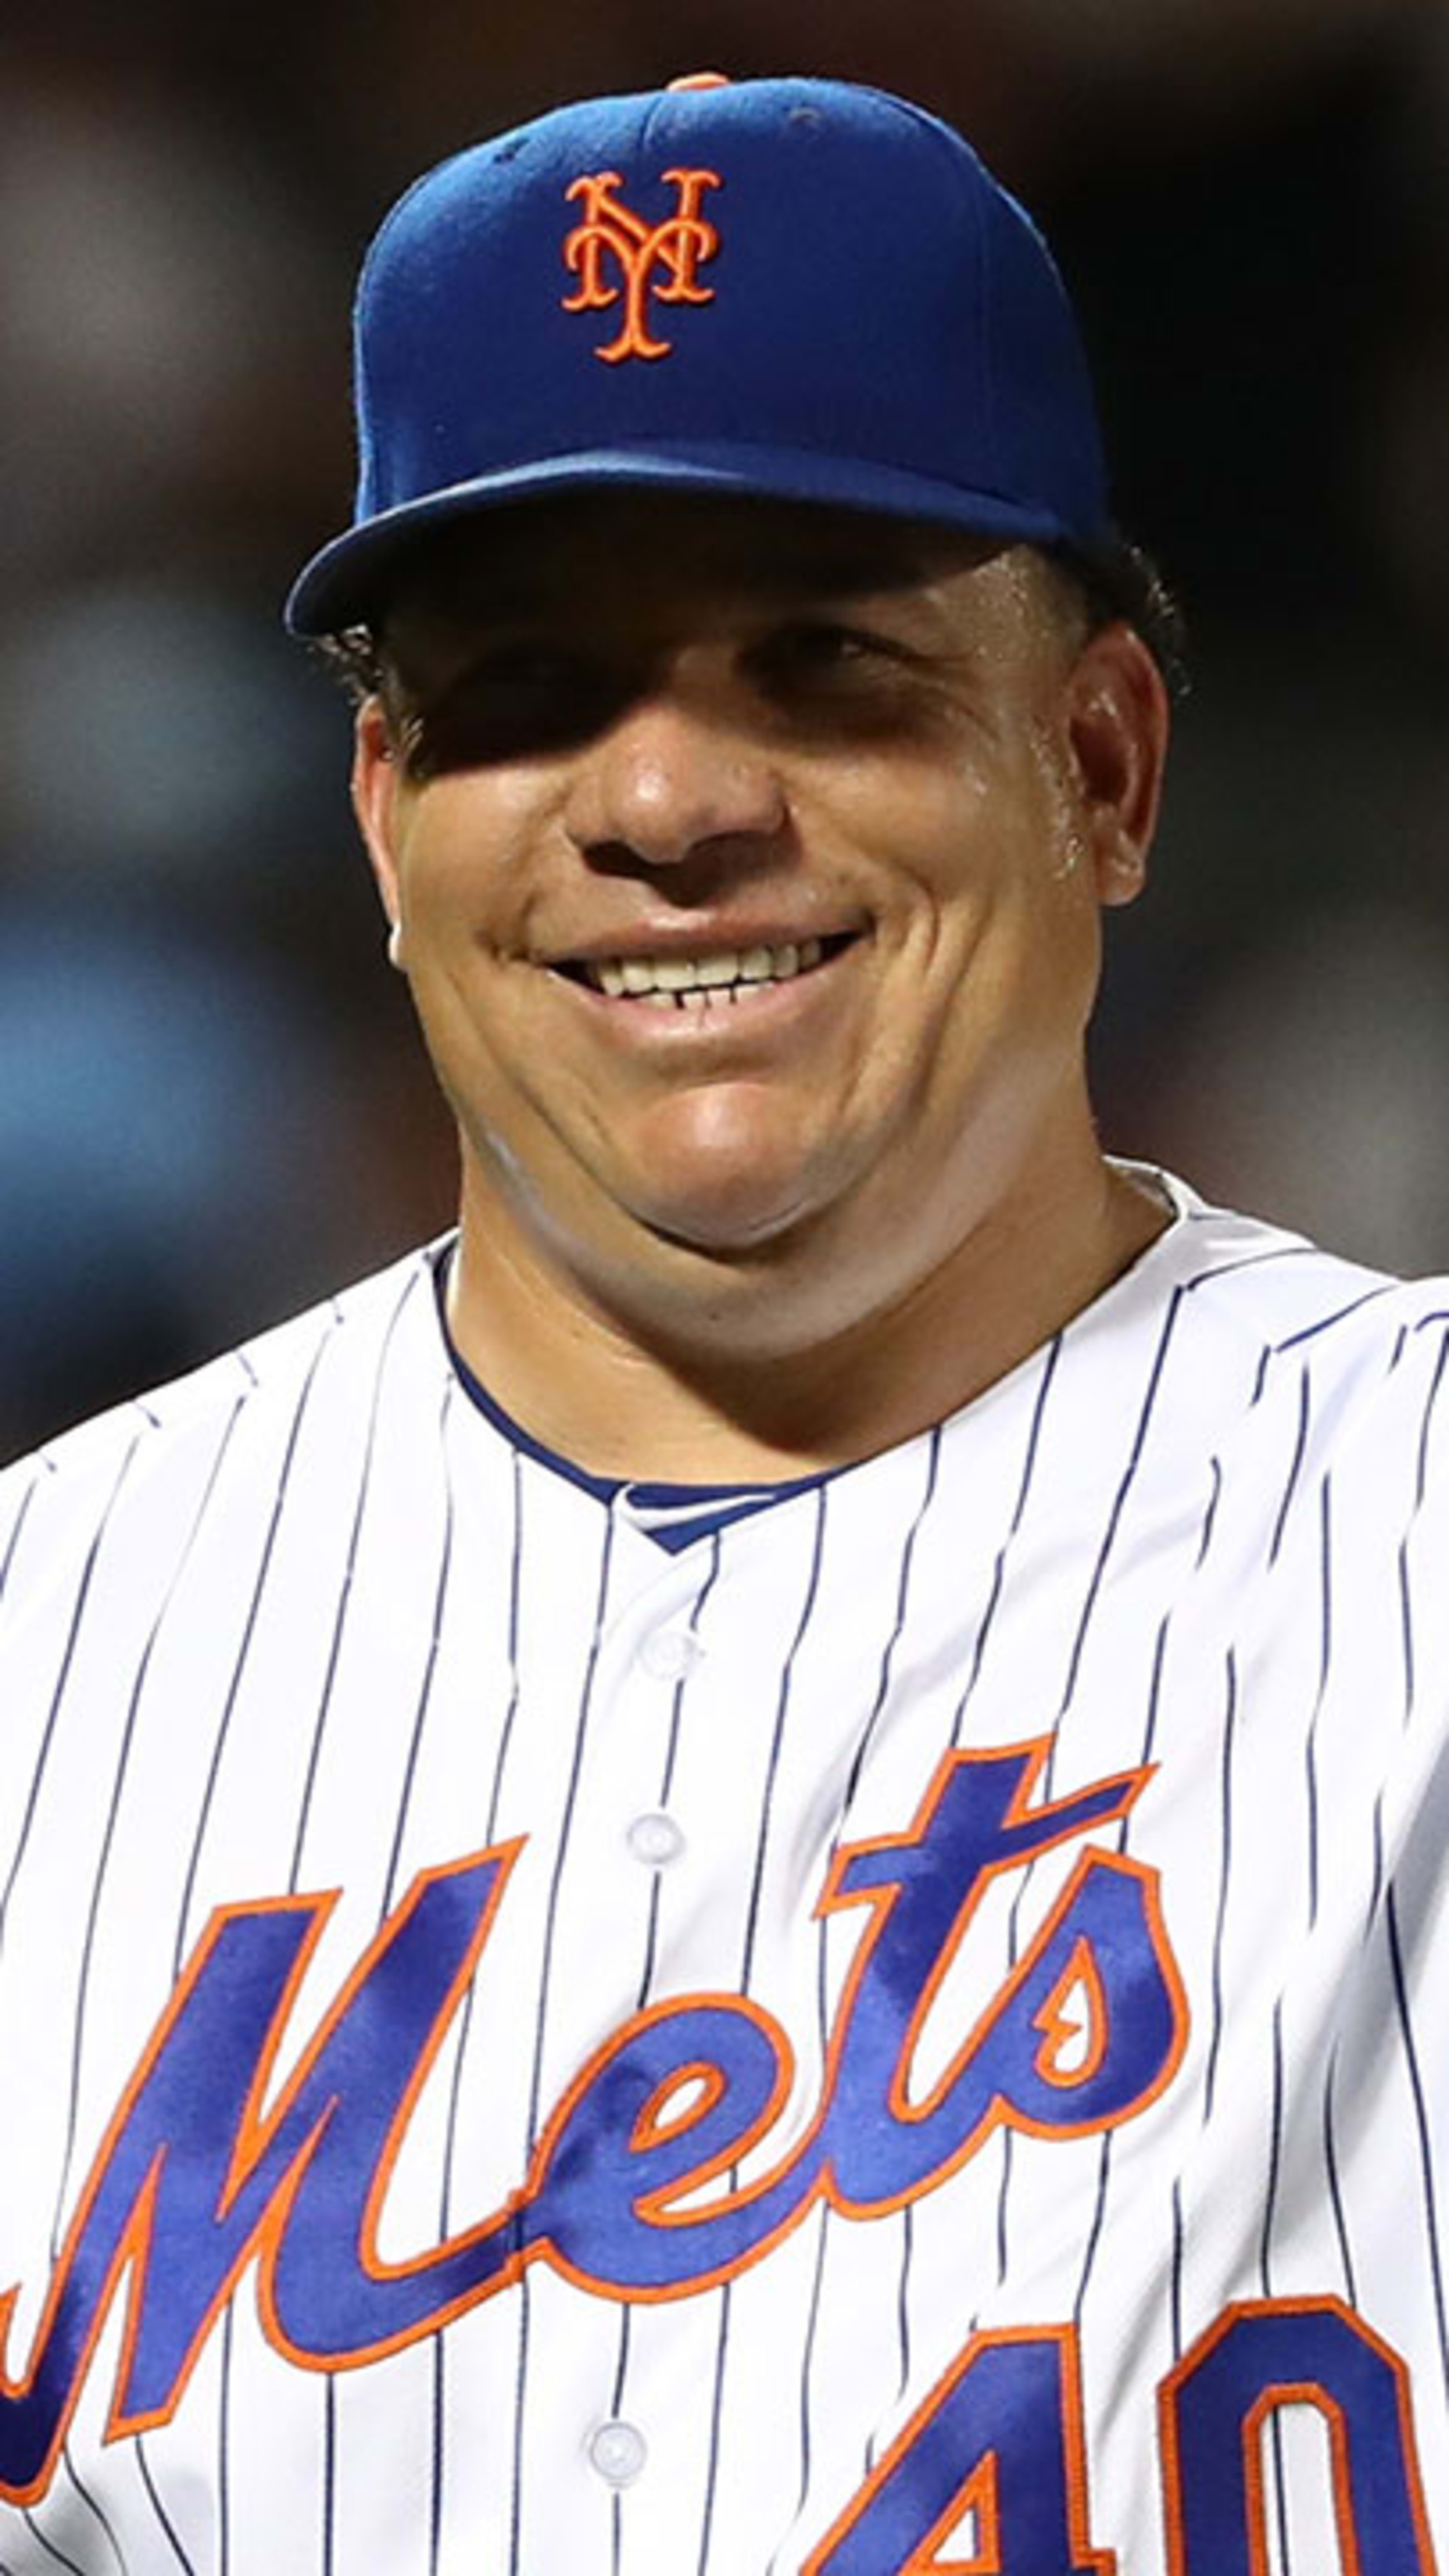 MLB Stories - Bartolo Colon's first and only home run